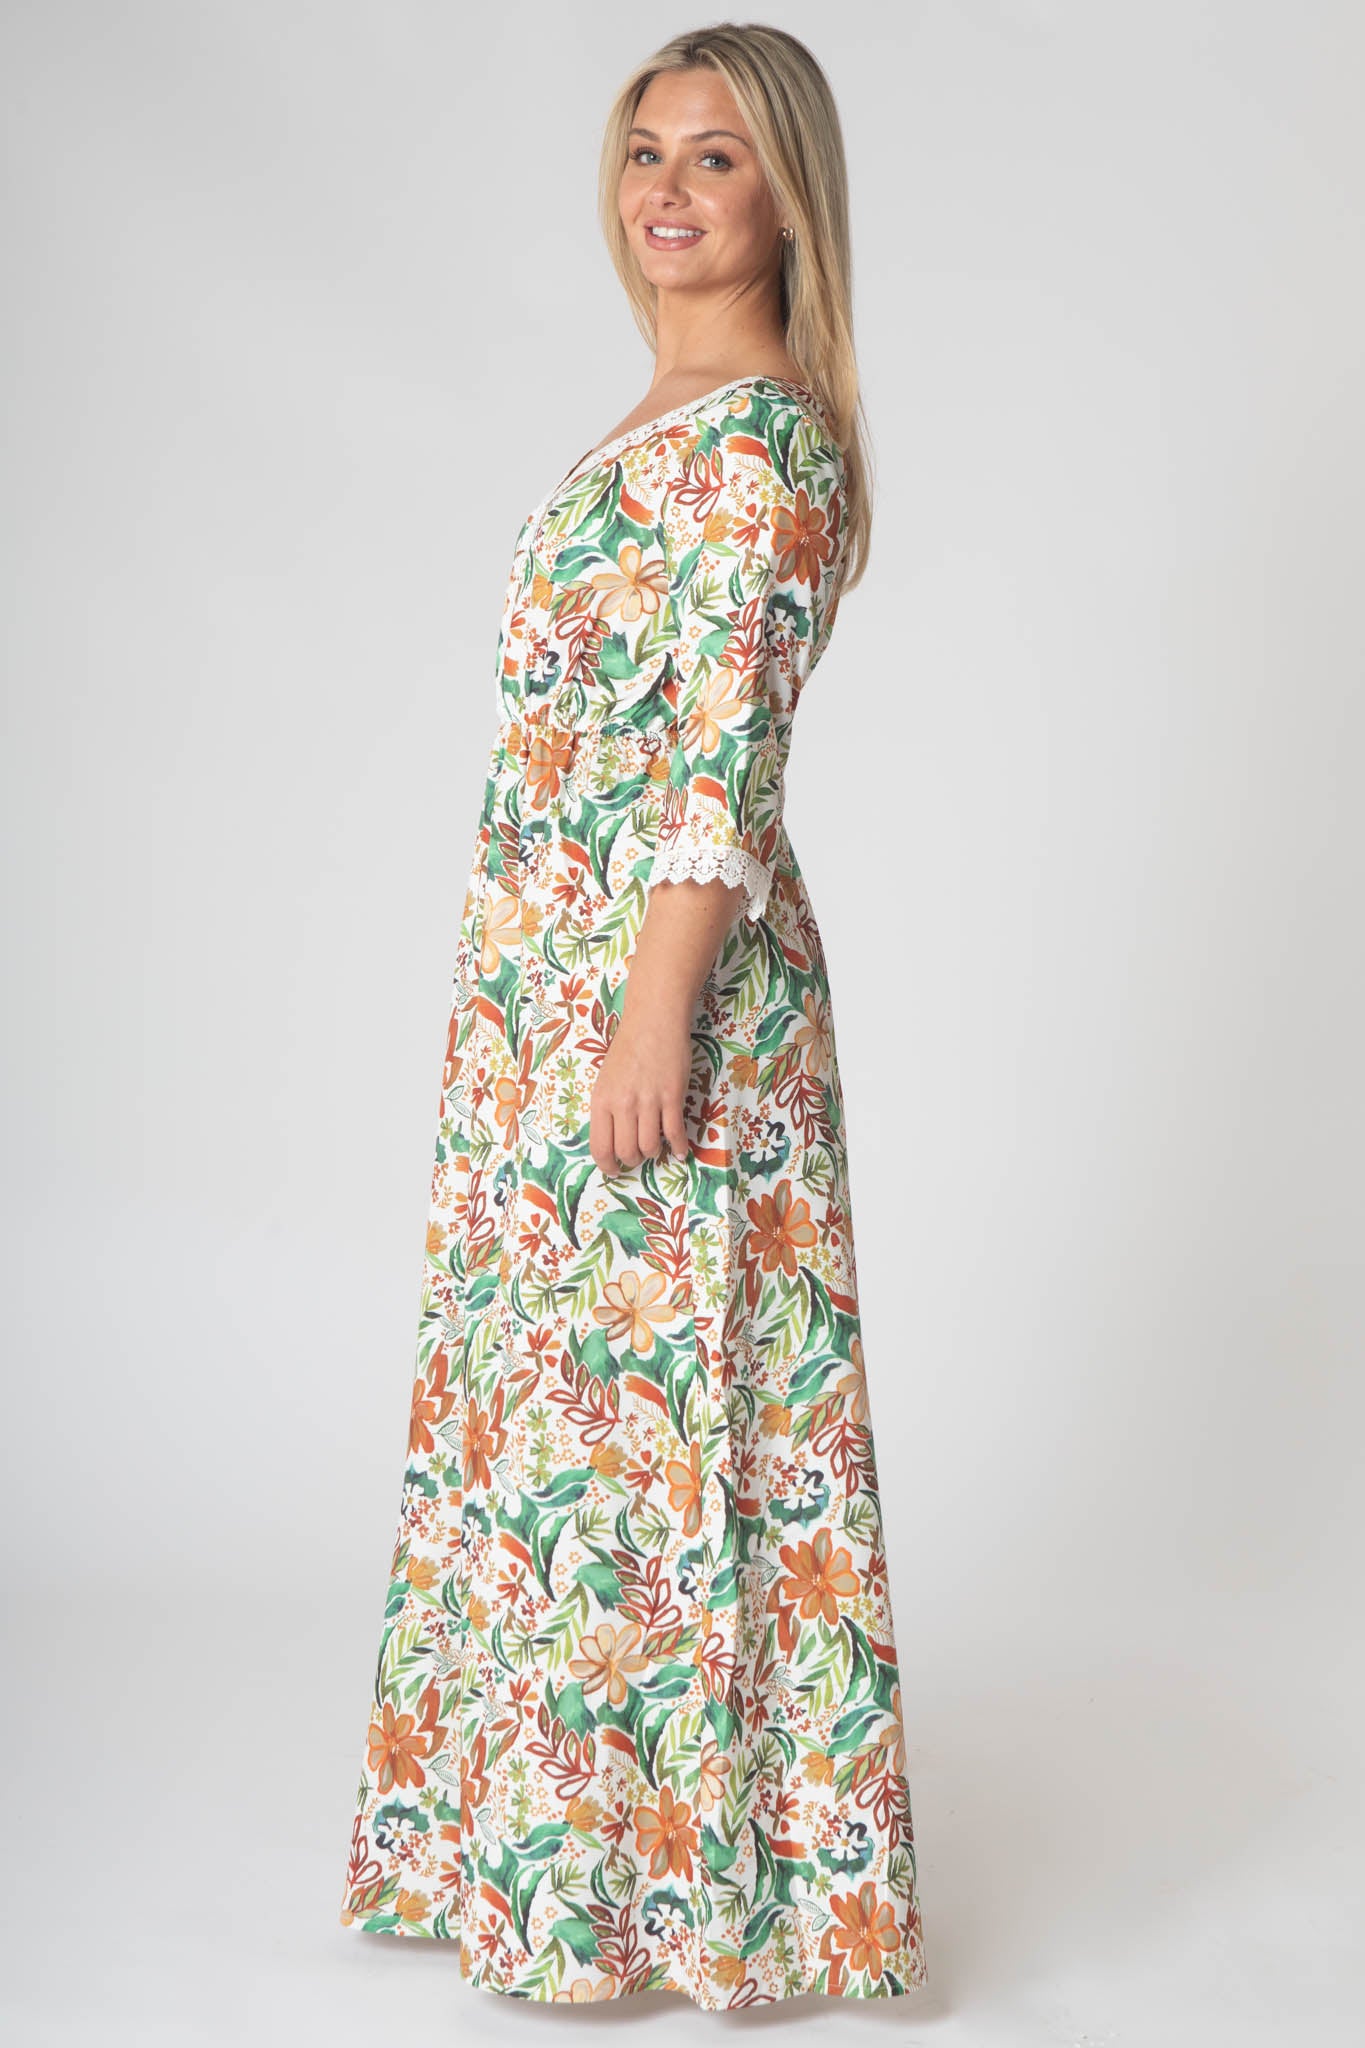 Fleur Maxi Dress With Lace V-Neck Detailing - Brown & Green